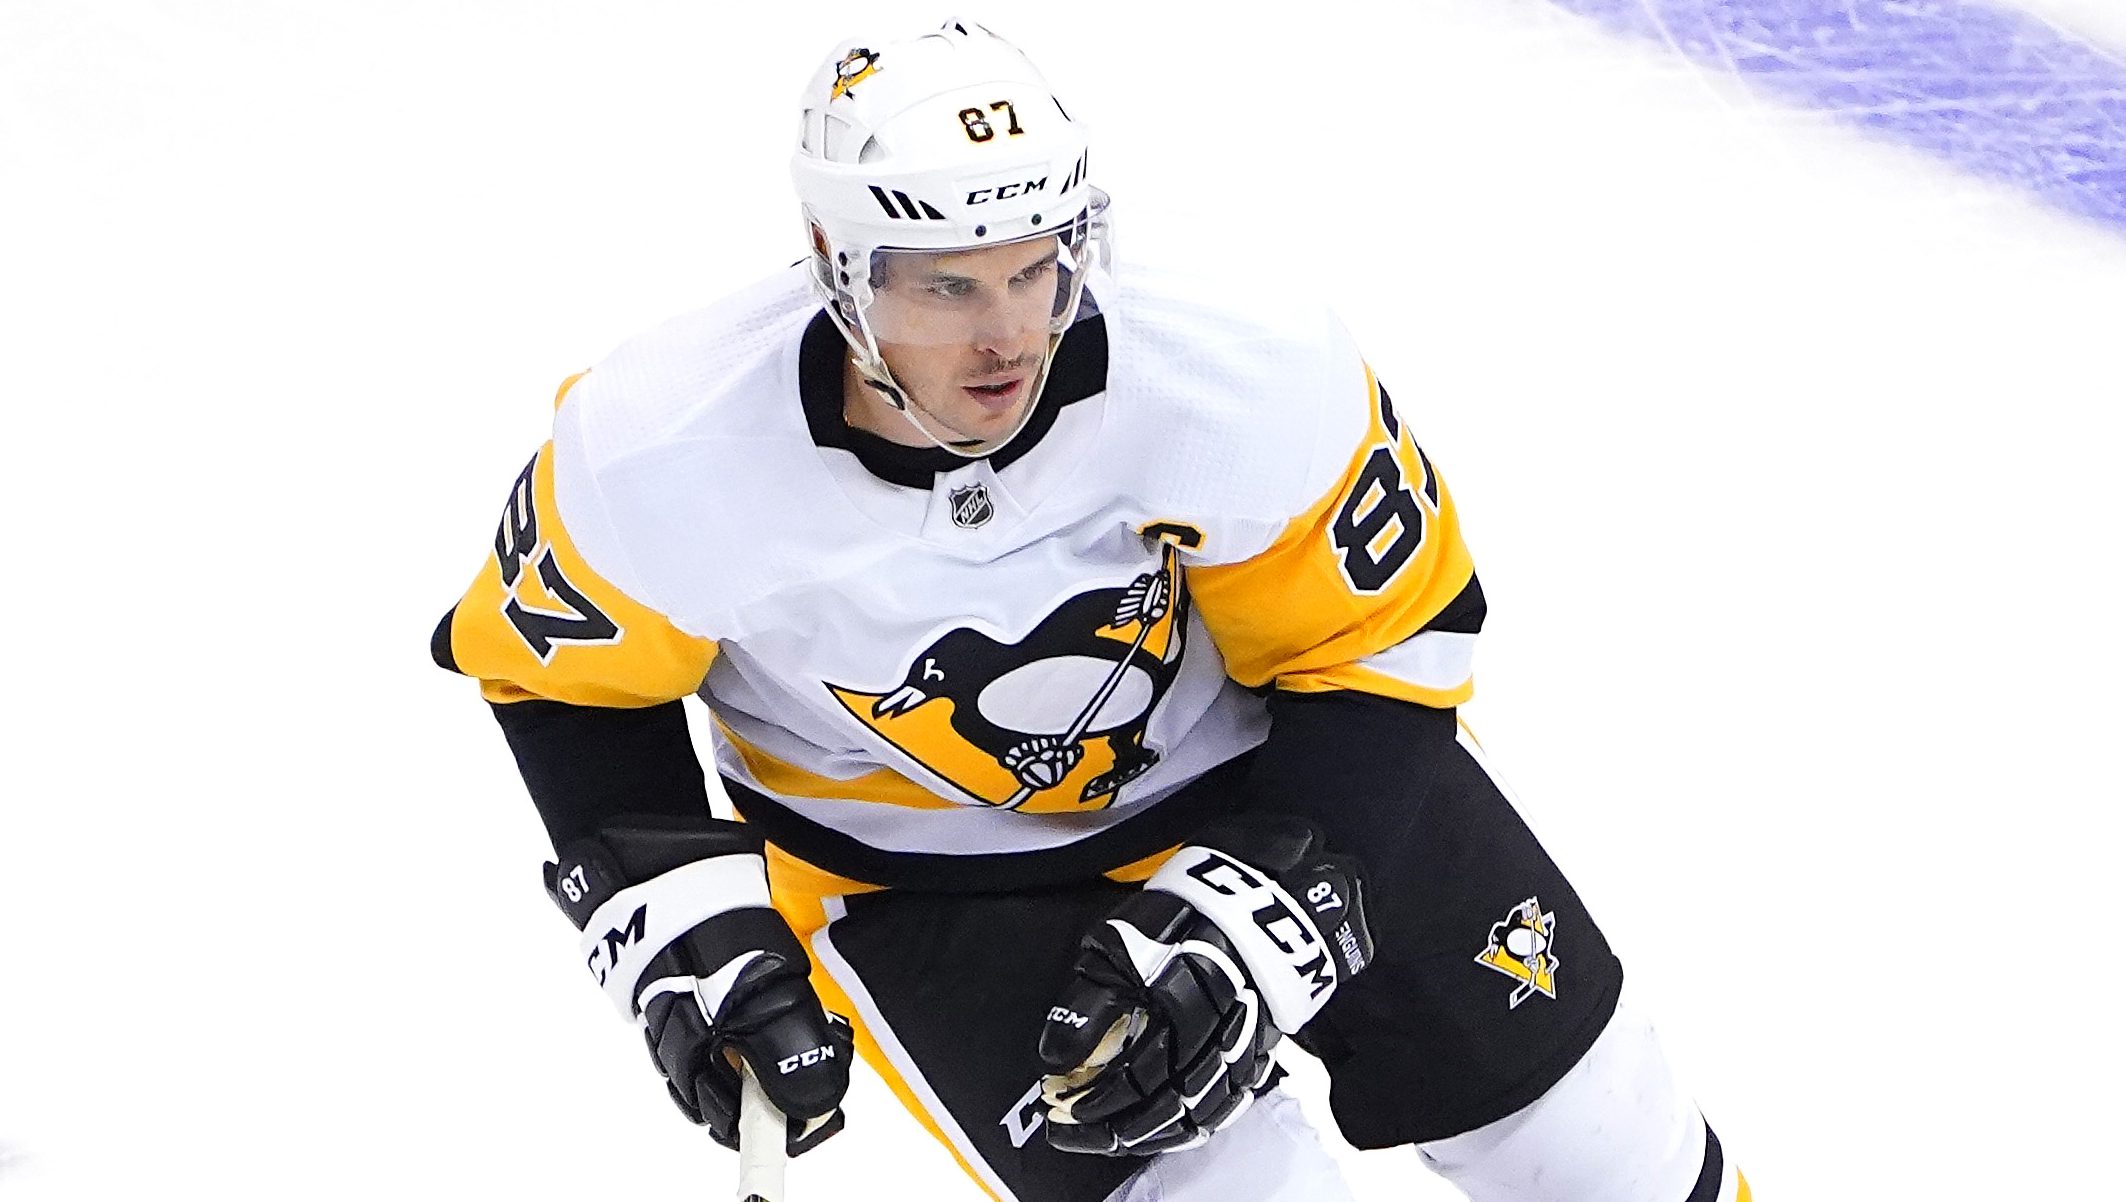 Penguins vs Flyers Live Stream How to Watch Online Free